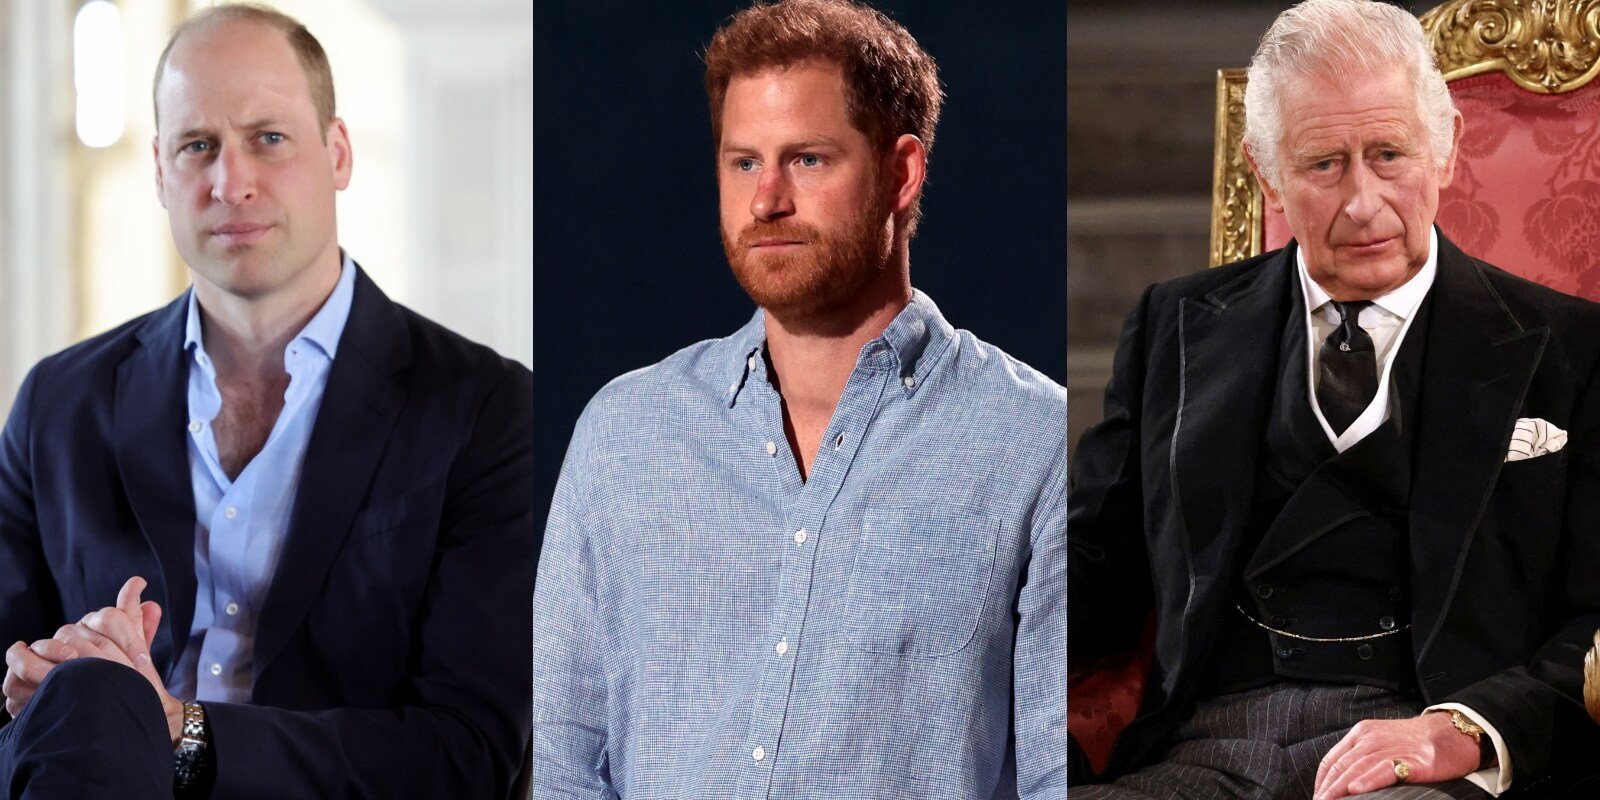 Prince William, Prince Harry and King Charles in side-by-side photographs.